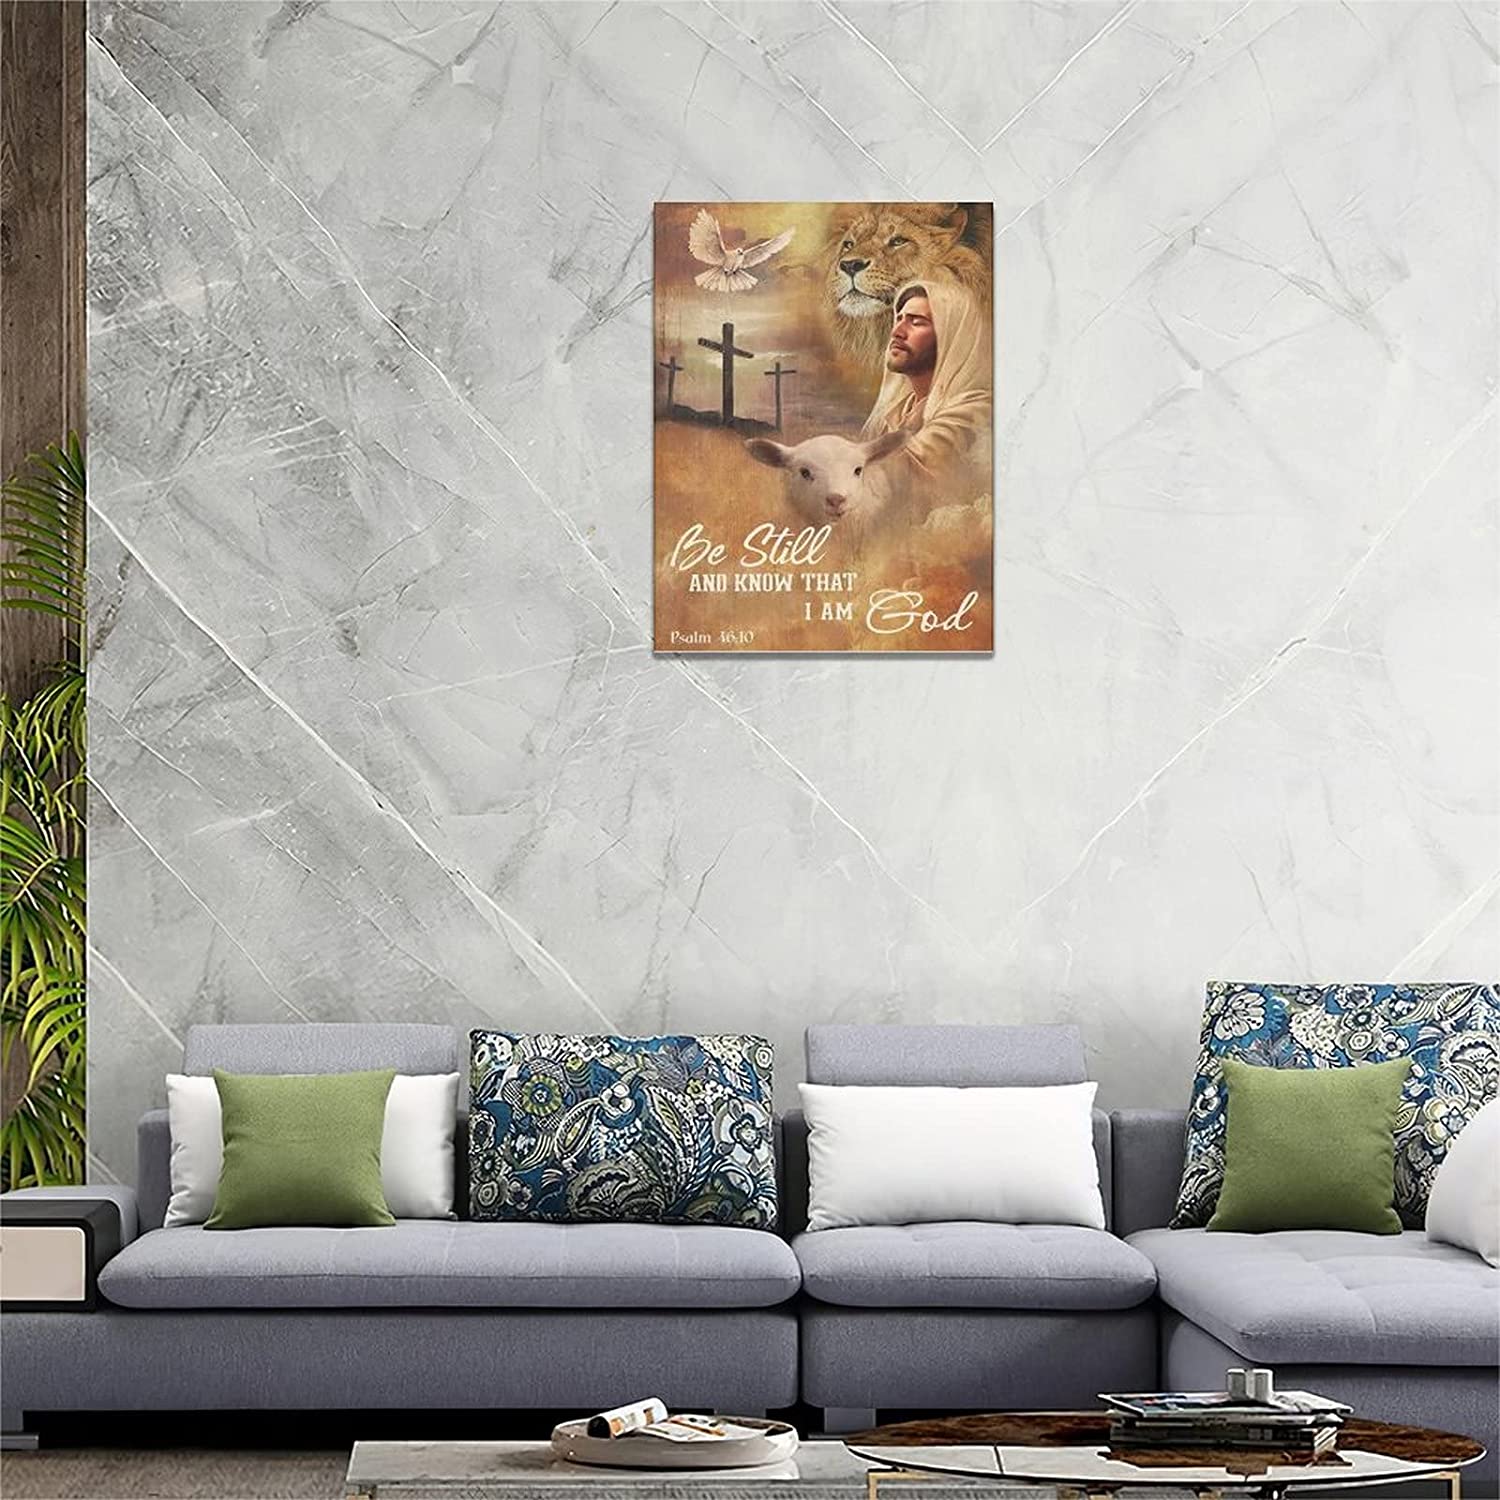 Jesus and Lion Canvas Wall Art Lion of Judah Wall Decor Christian Lion Lamb  Dove Cross Jesus Pictures for Wall Prints Inspirational Painting Modern  Religious Home Artwork Decor 12